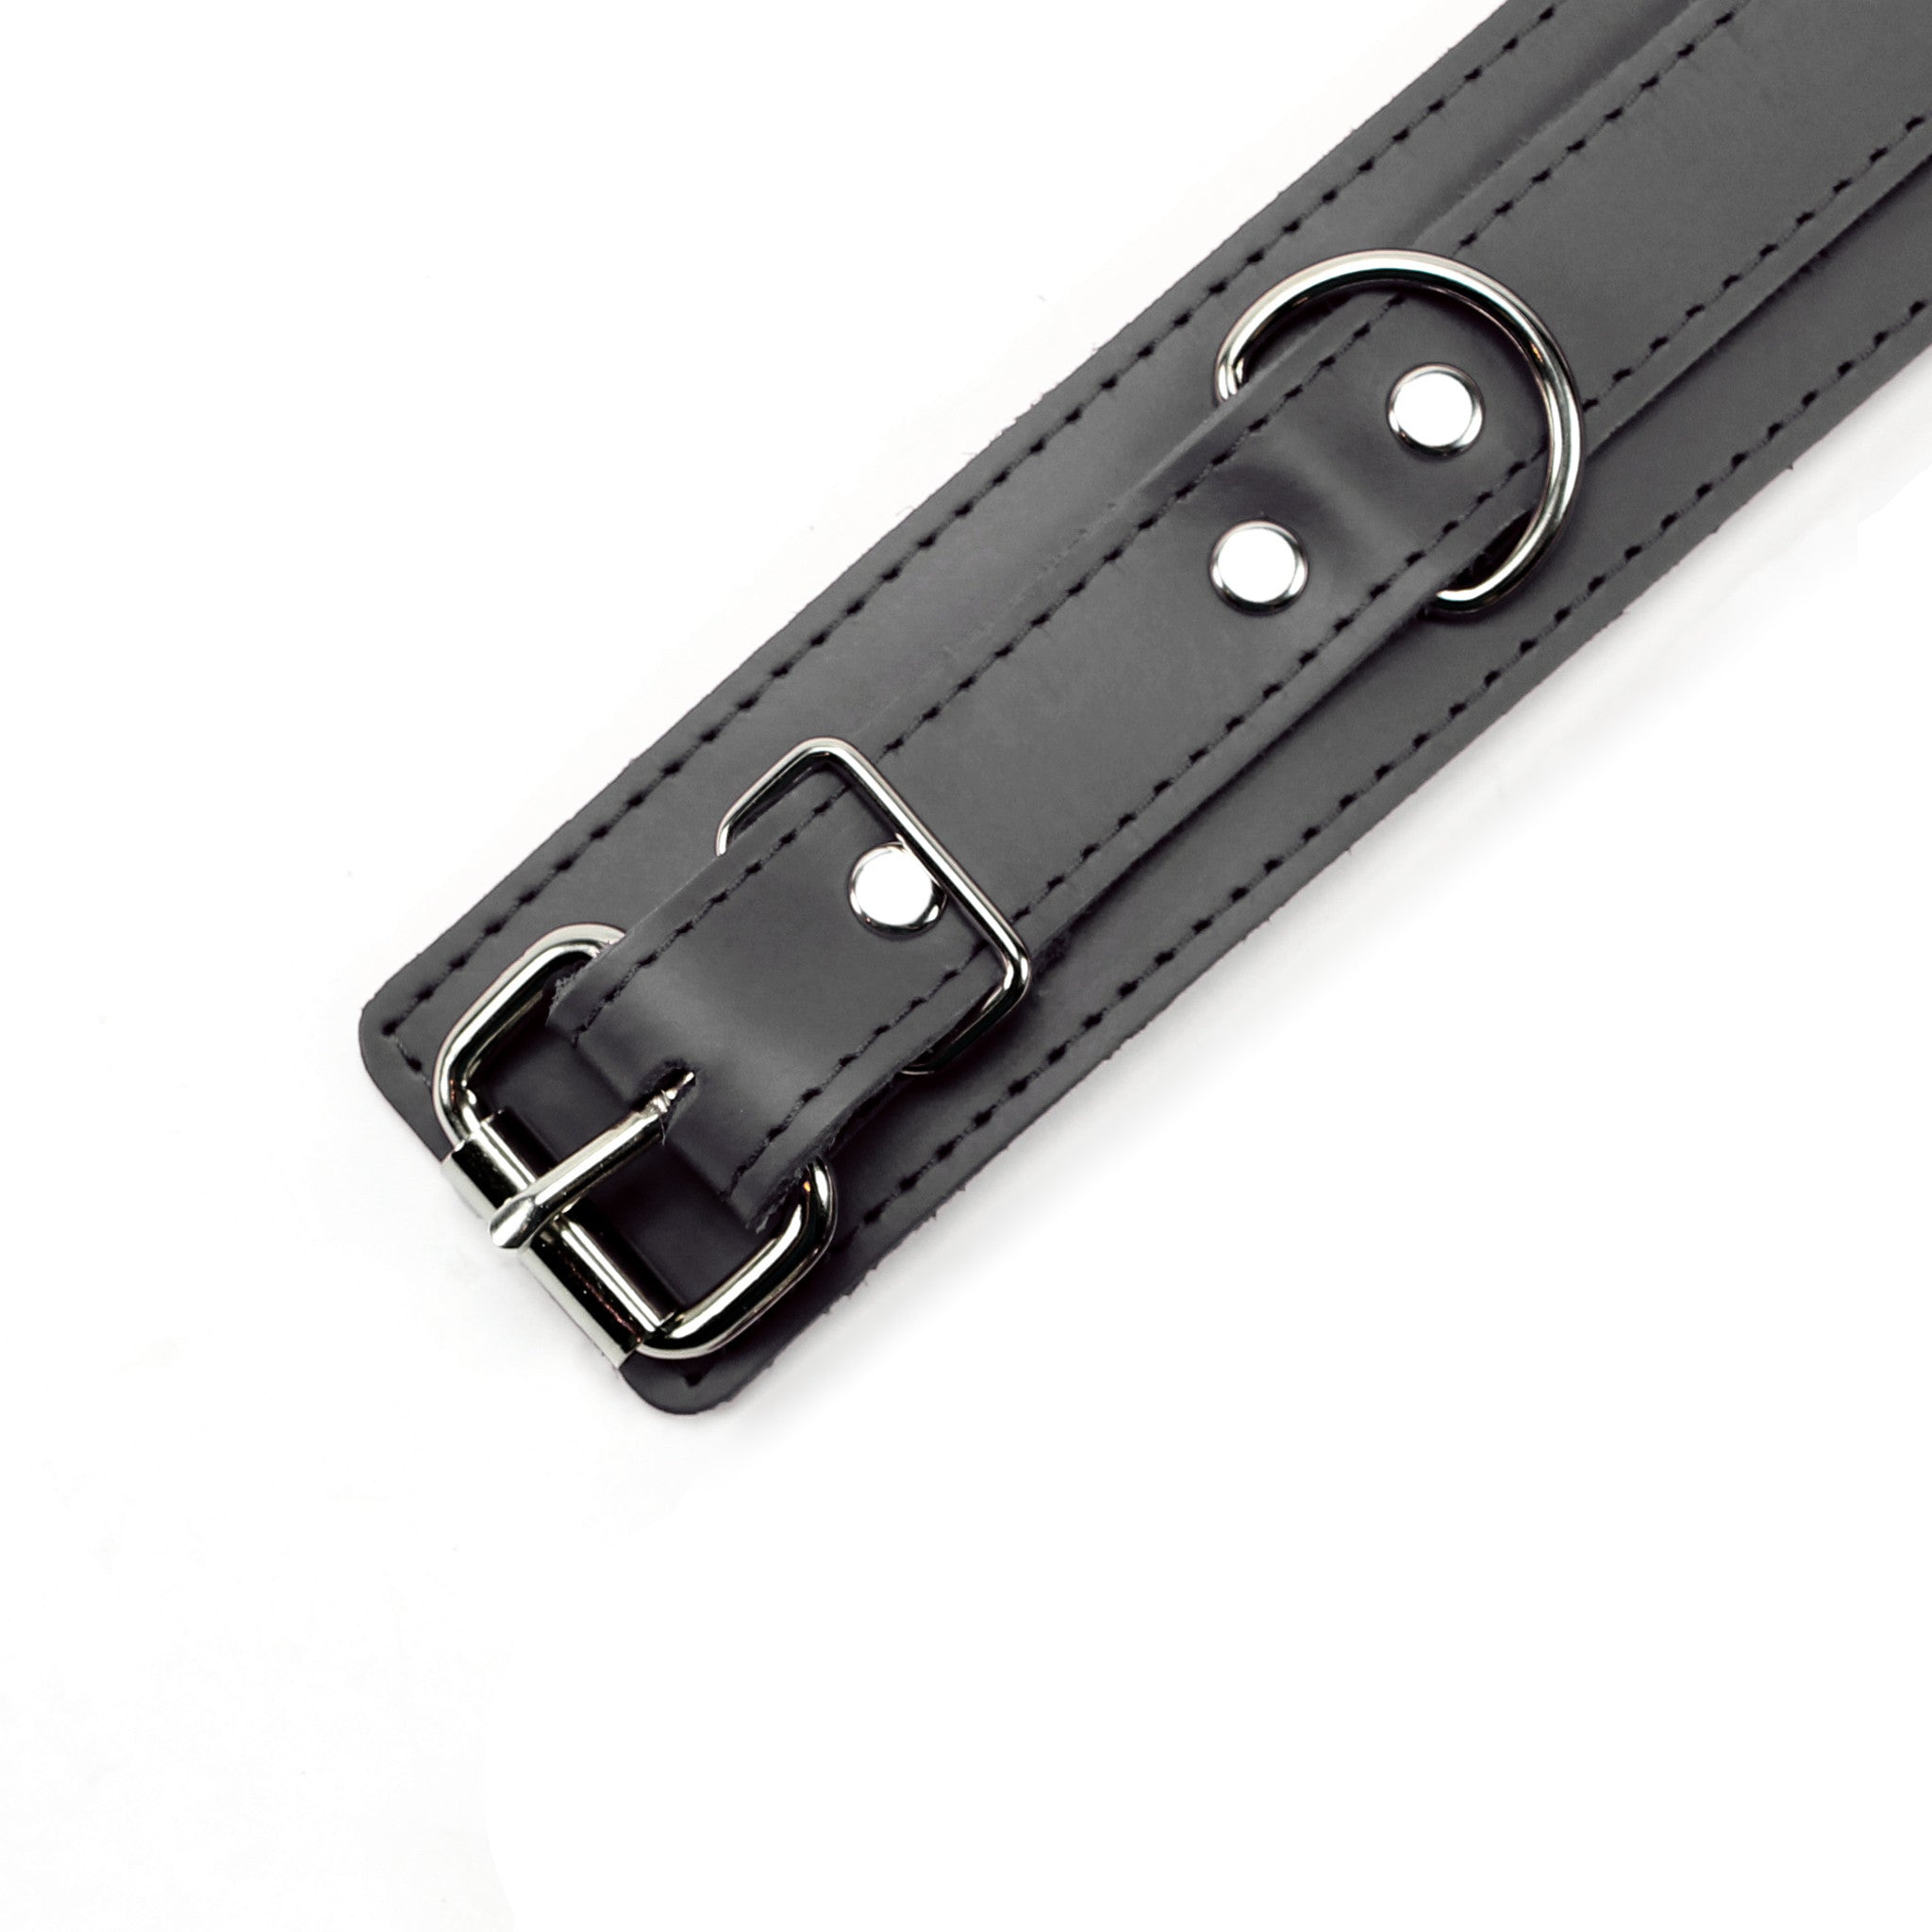 Atlas Black Leather Submissive Bondage Collar with Nickel-Plated Hardware